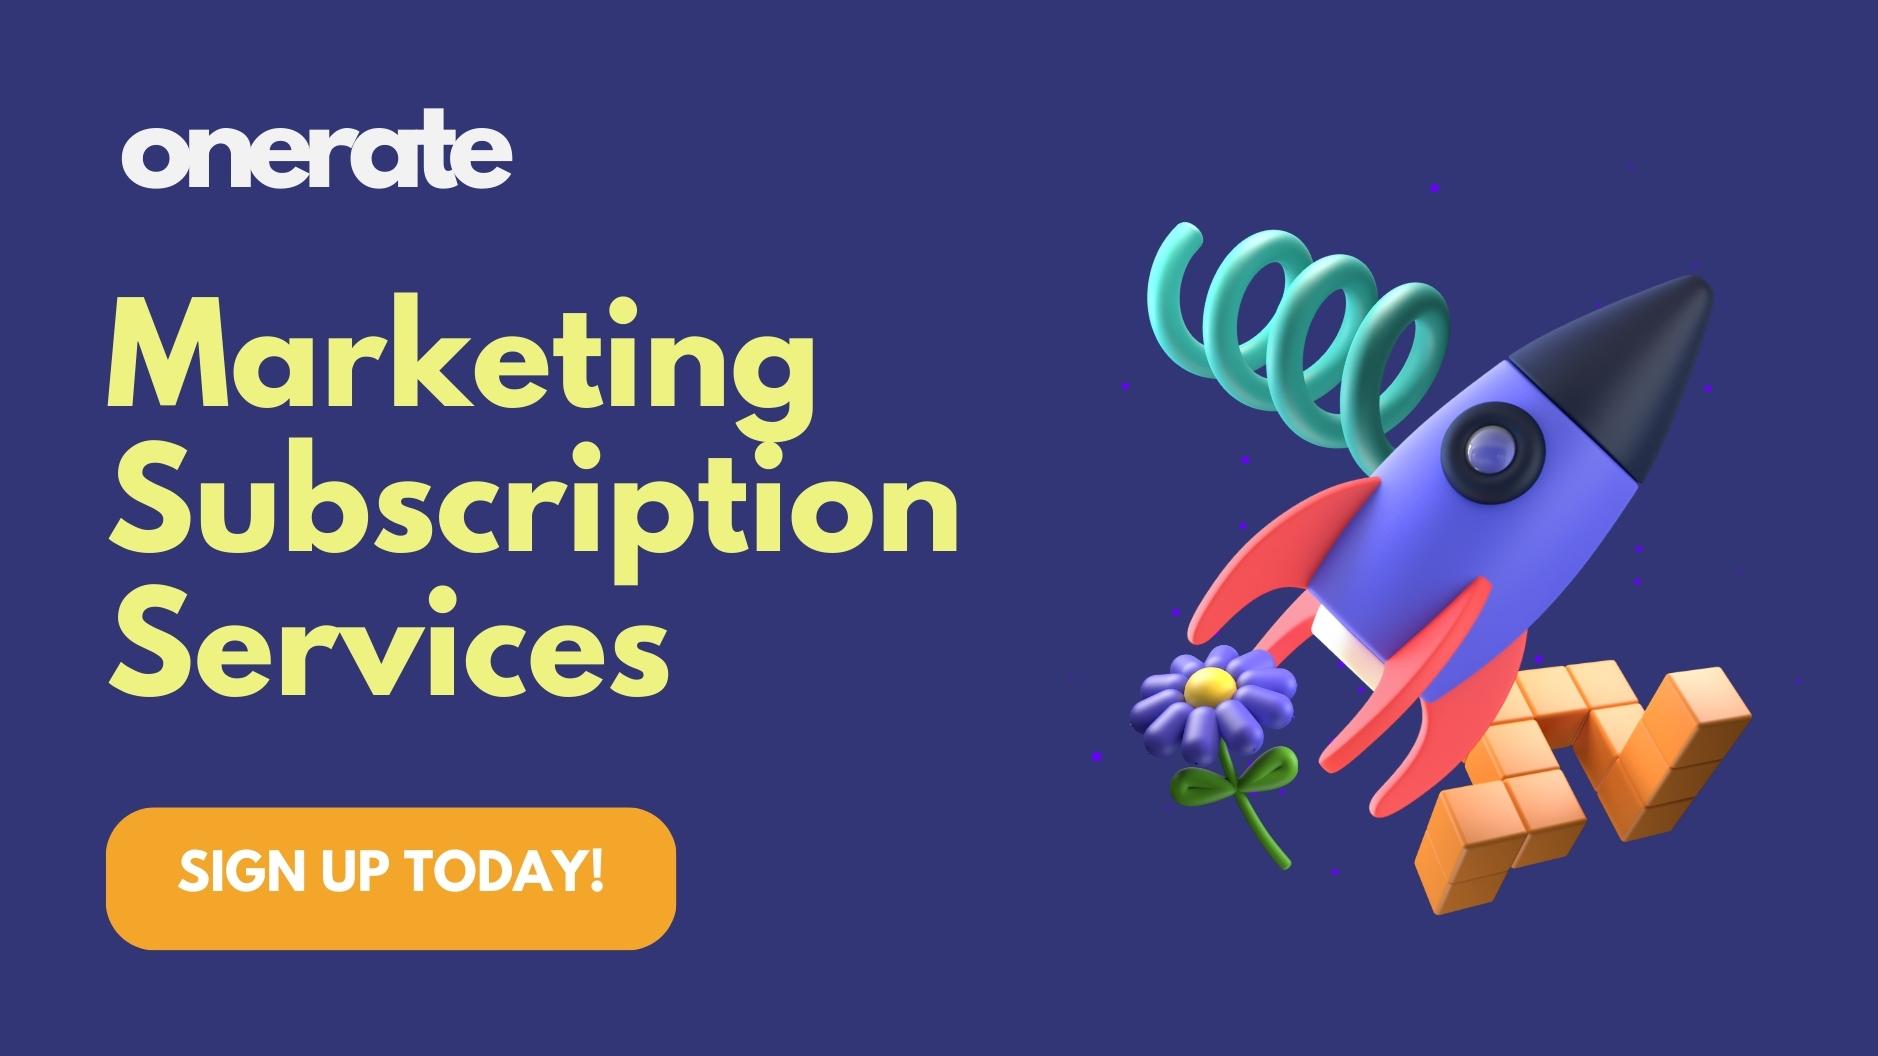 Marketing Subscription Services - onerate (1)